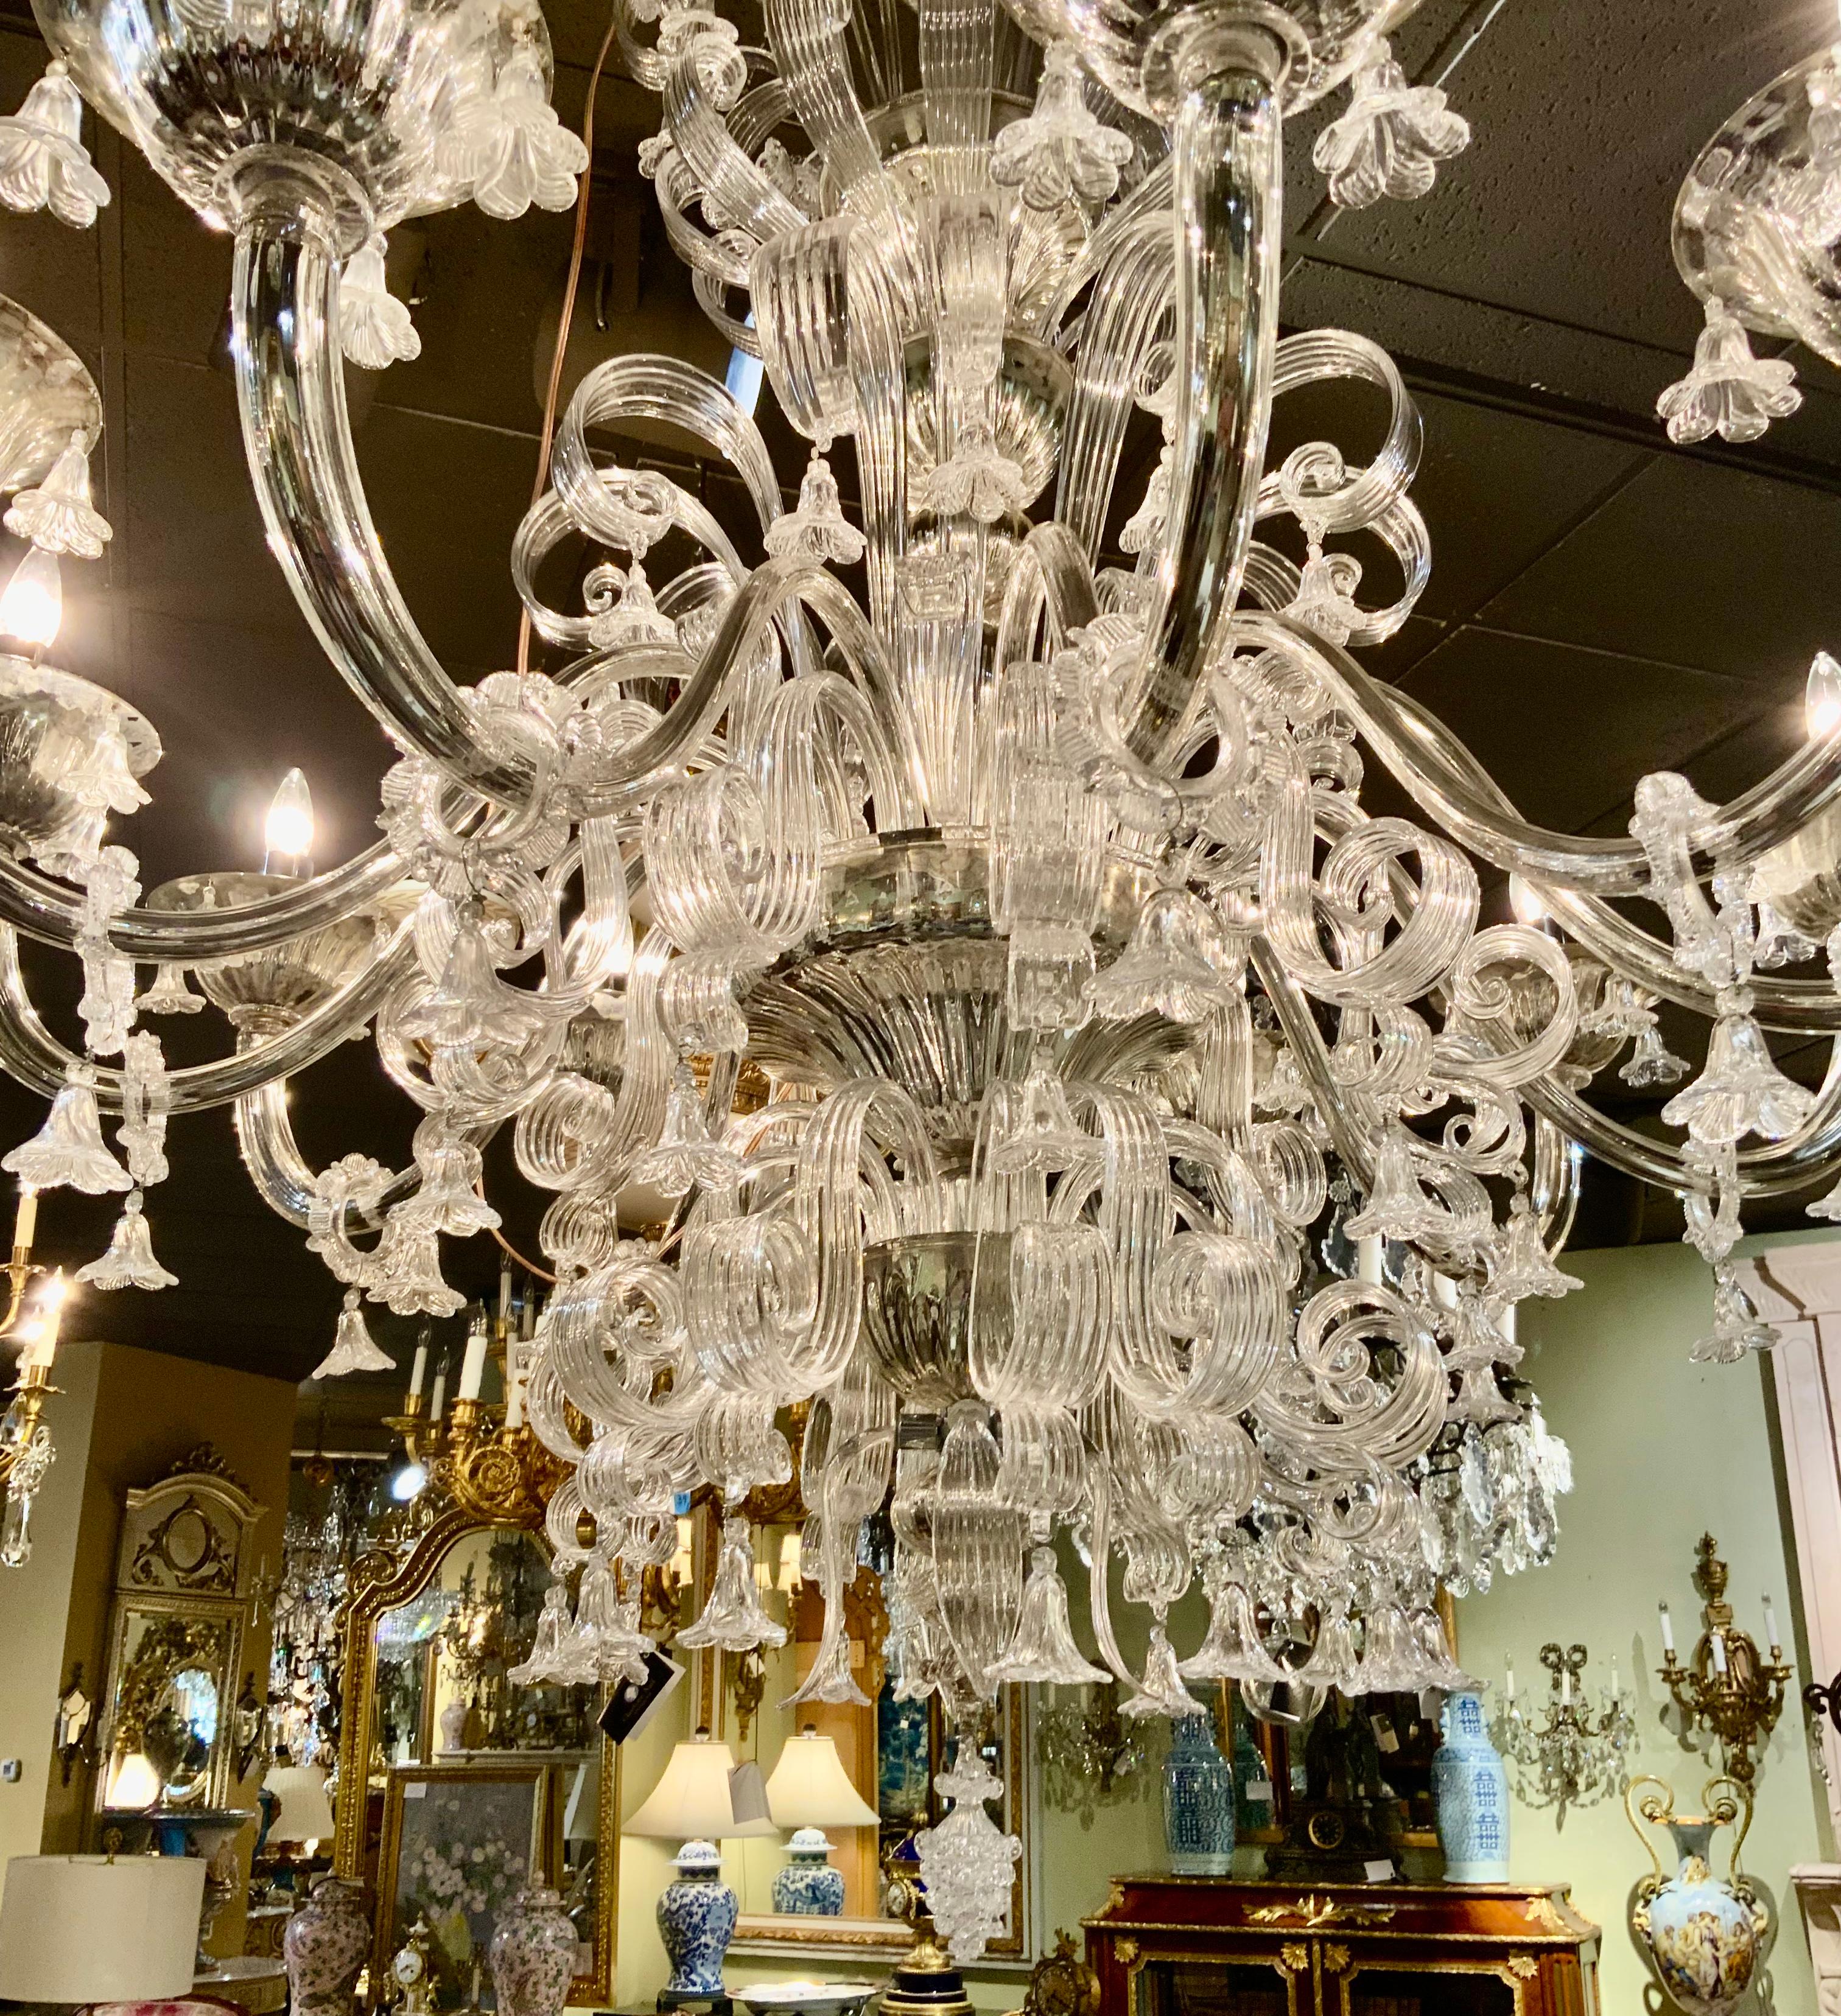 Large Murano Andromeda International Mirrored Glass “Le Roy” Chandelier For Sale 2